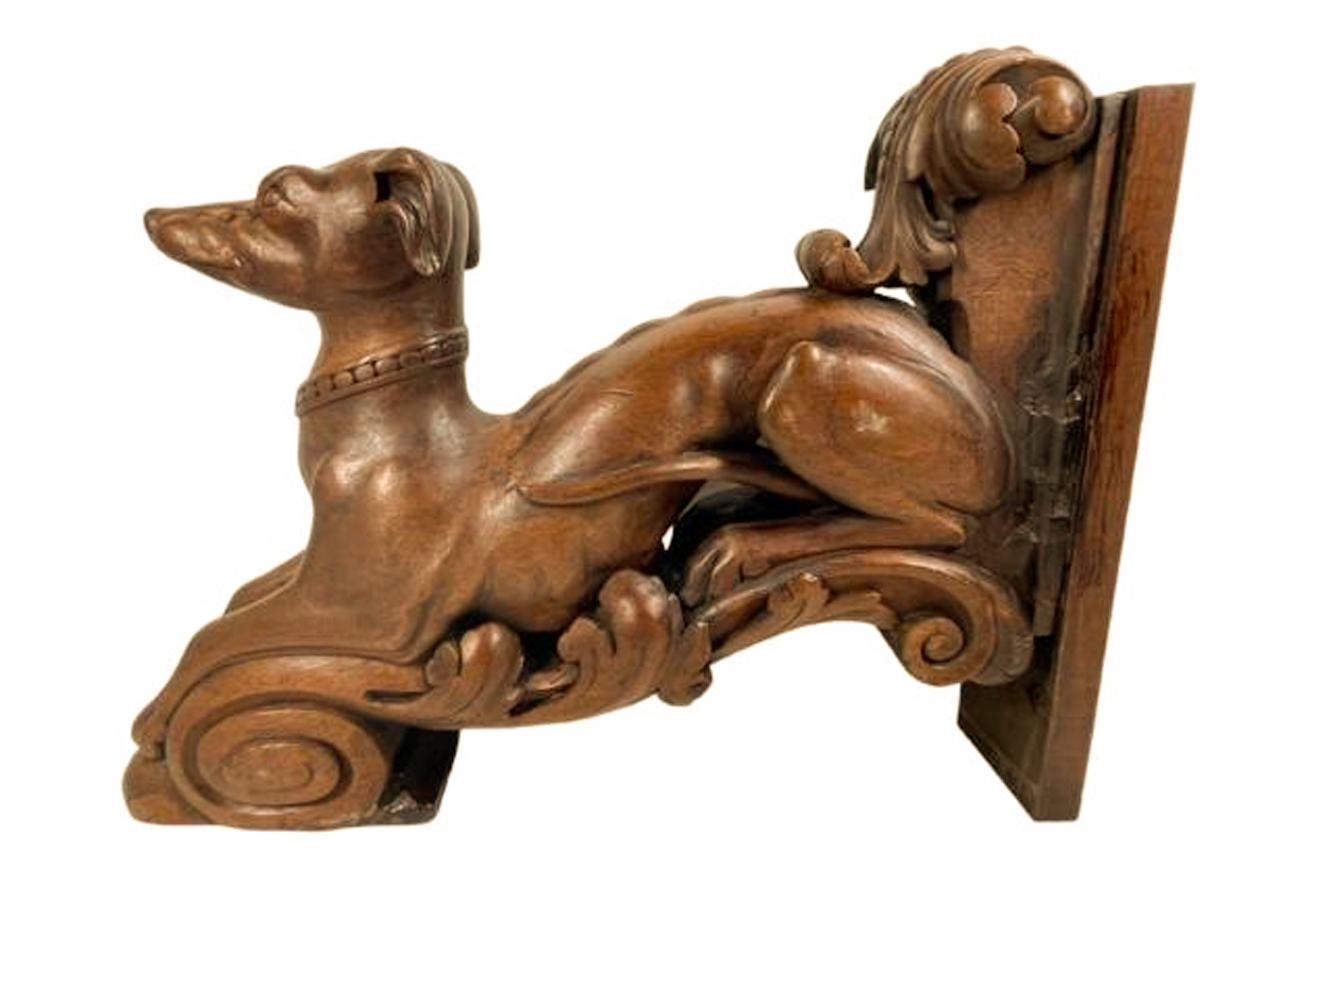 Finely carved pair of 19th century Italian walnut figures of recumbent whippets on foliate brackets, each facing forward with head raised and wearing a collar.
The fully carved three dimensional figures likely decorative architectural elements now